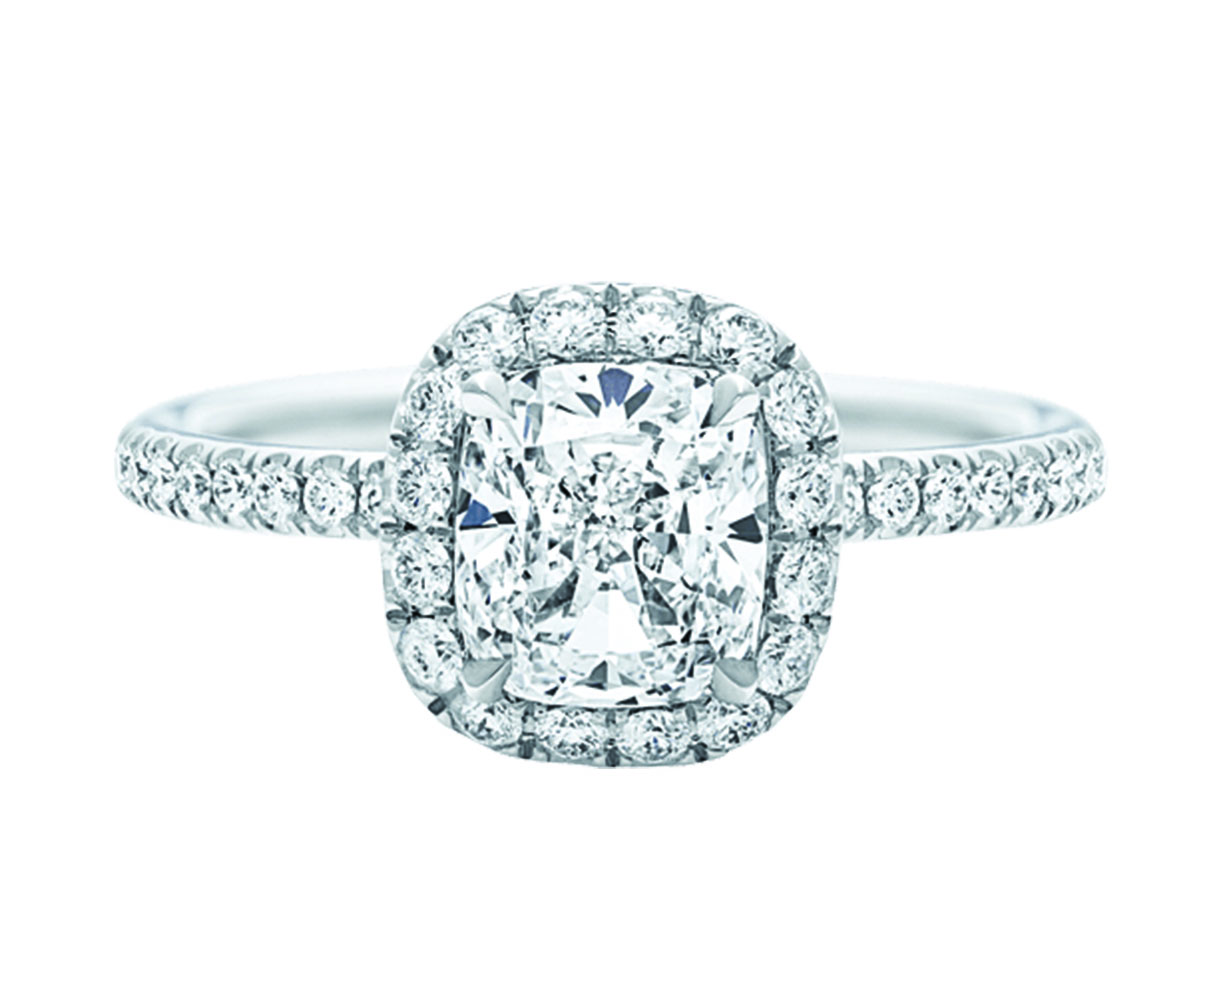 Cushion cut diamond center stone ring with paved halo and platinum pave band